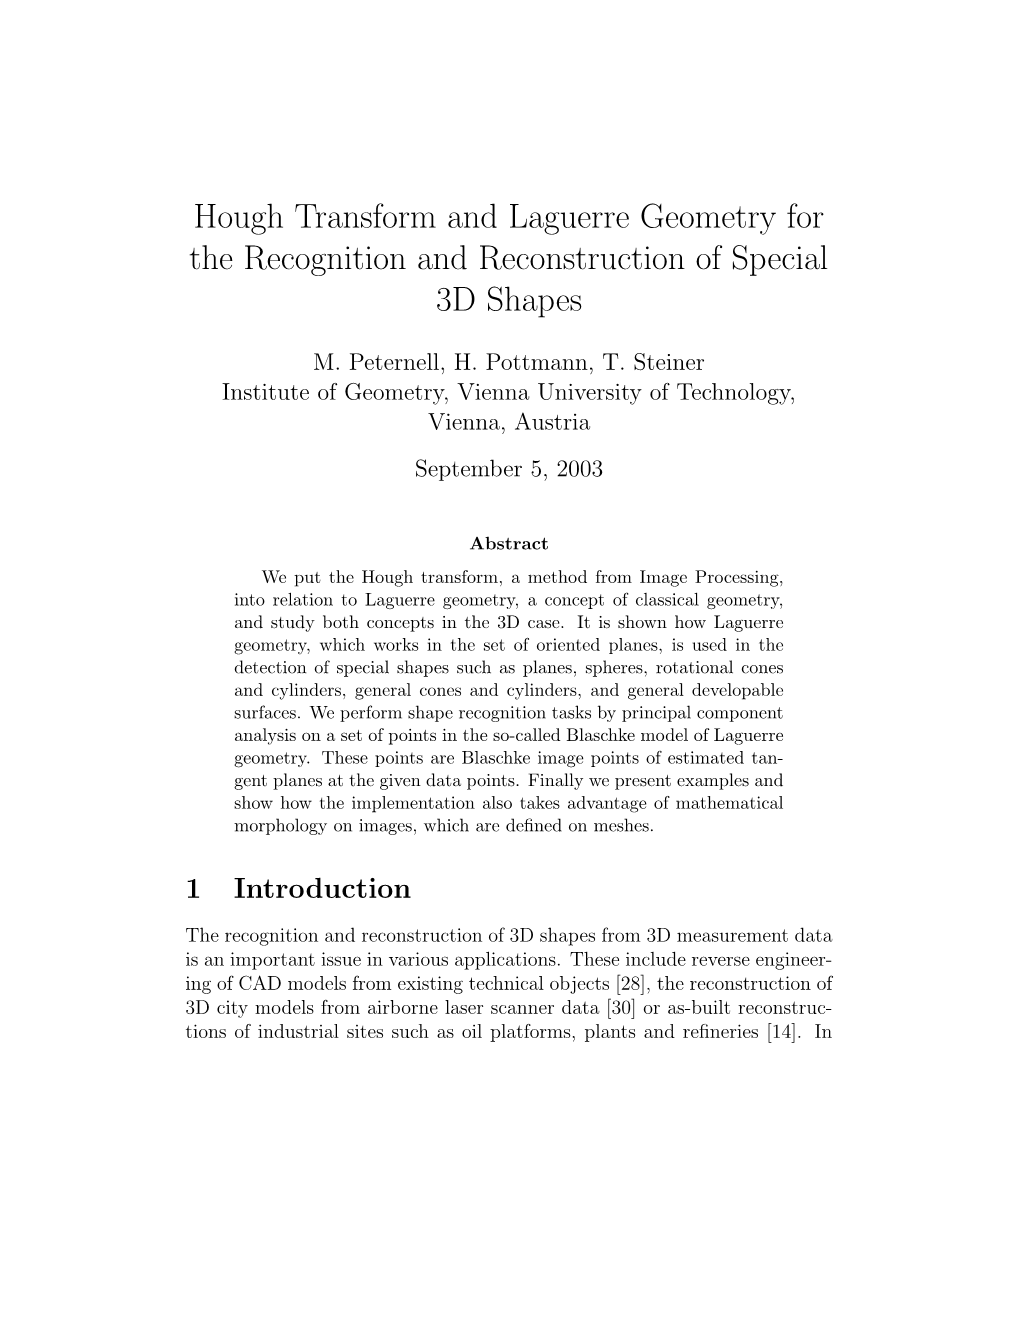 Hough Transform and Laguerre Geometry for the Recognition and Reconstruction of Special 3D Shapes